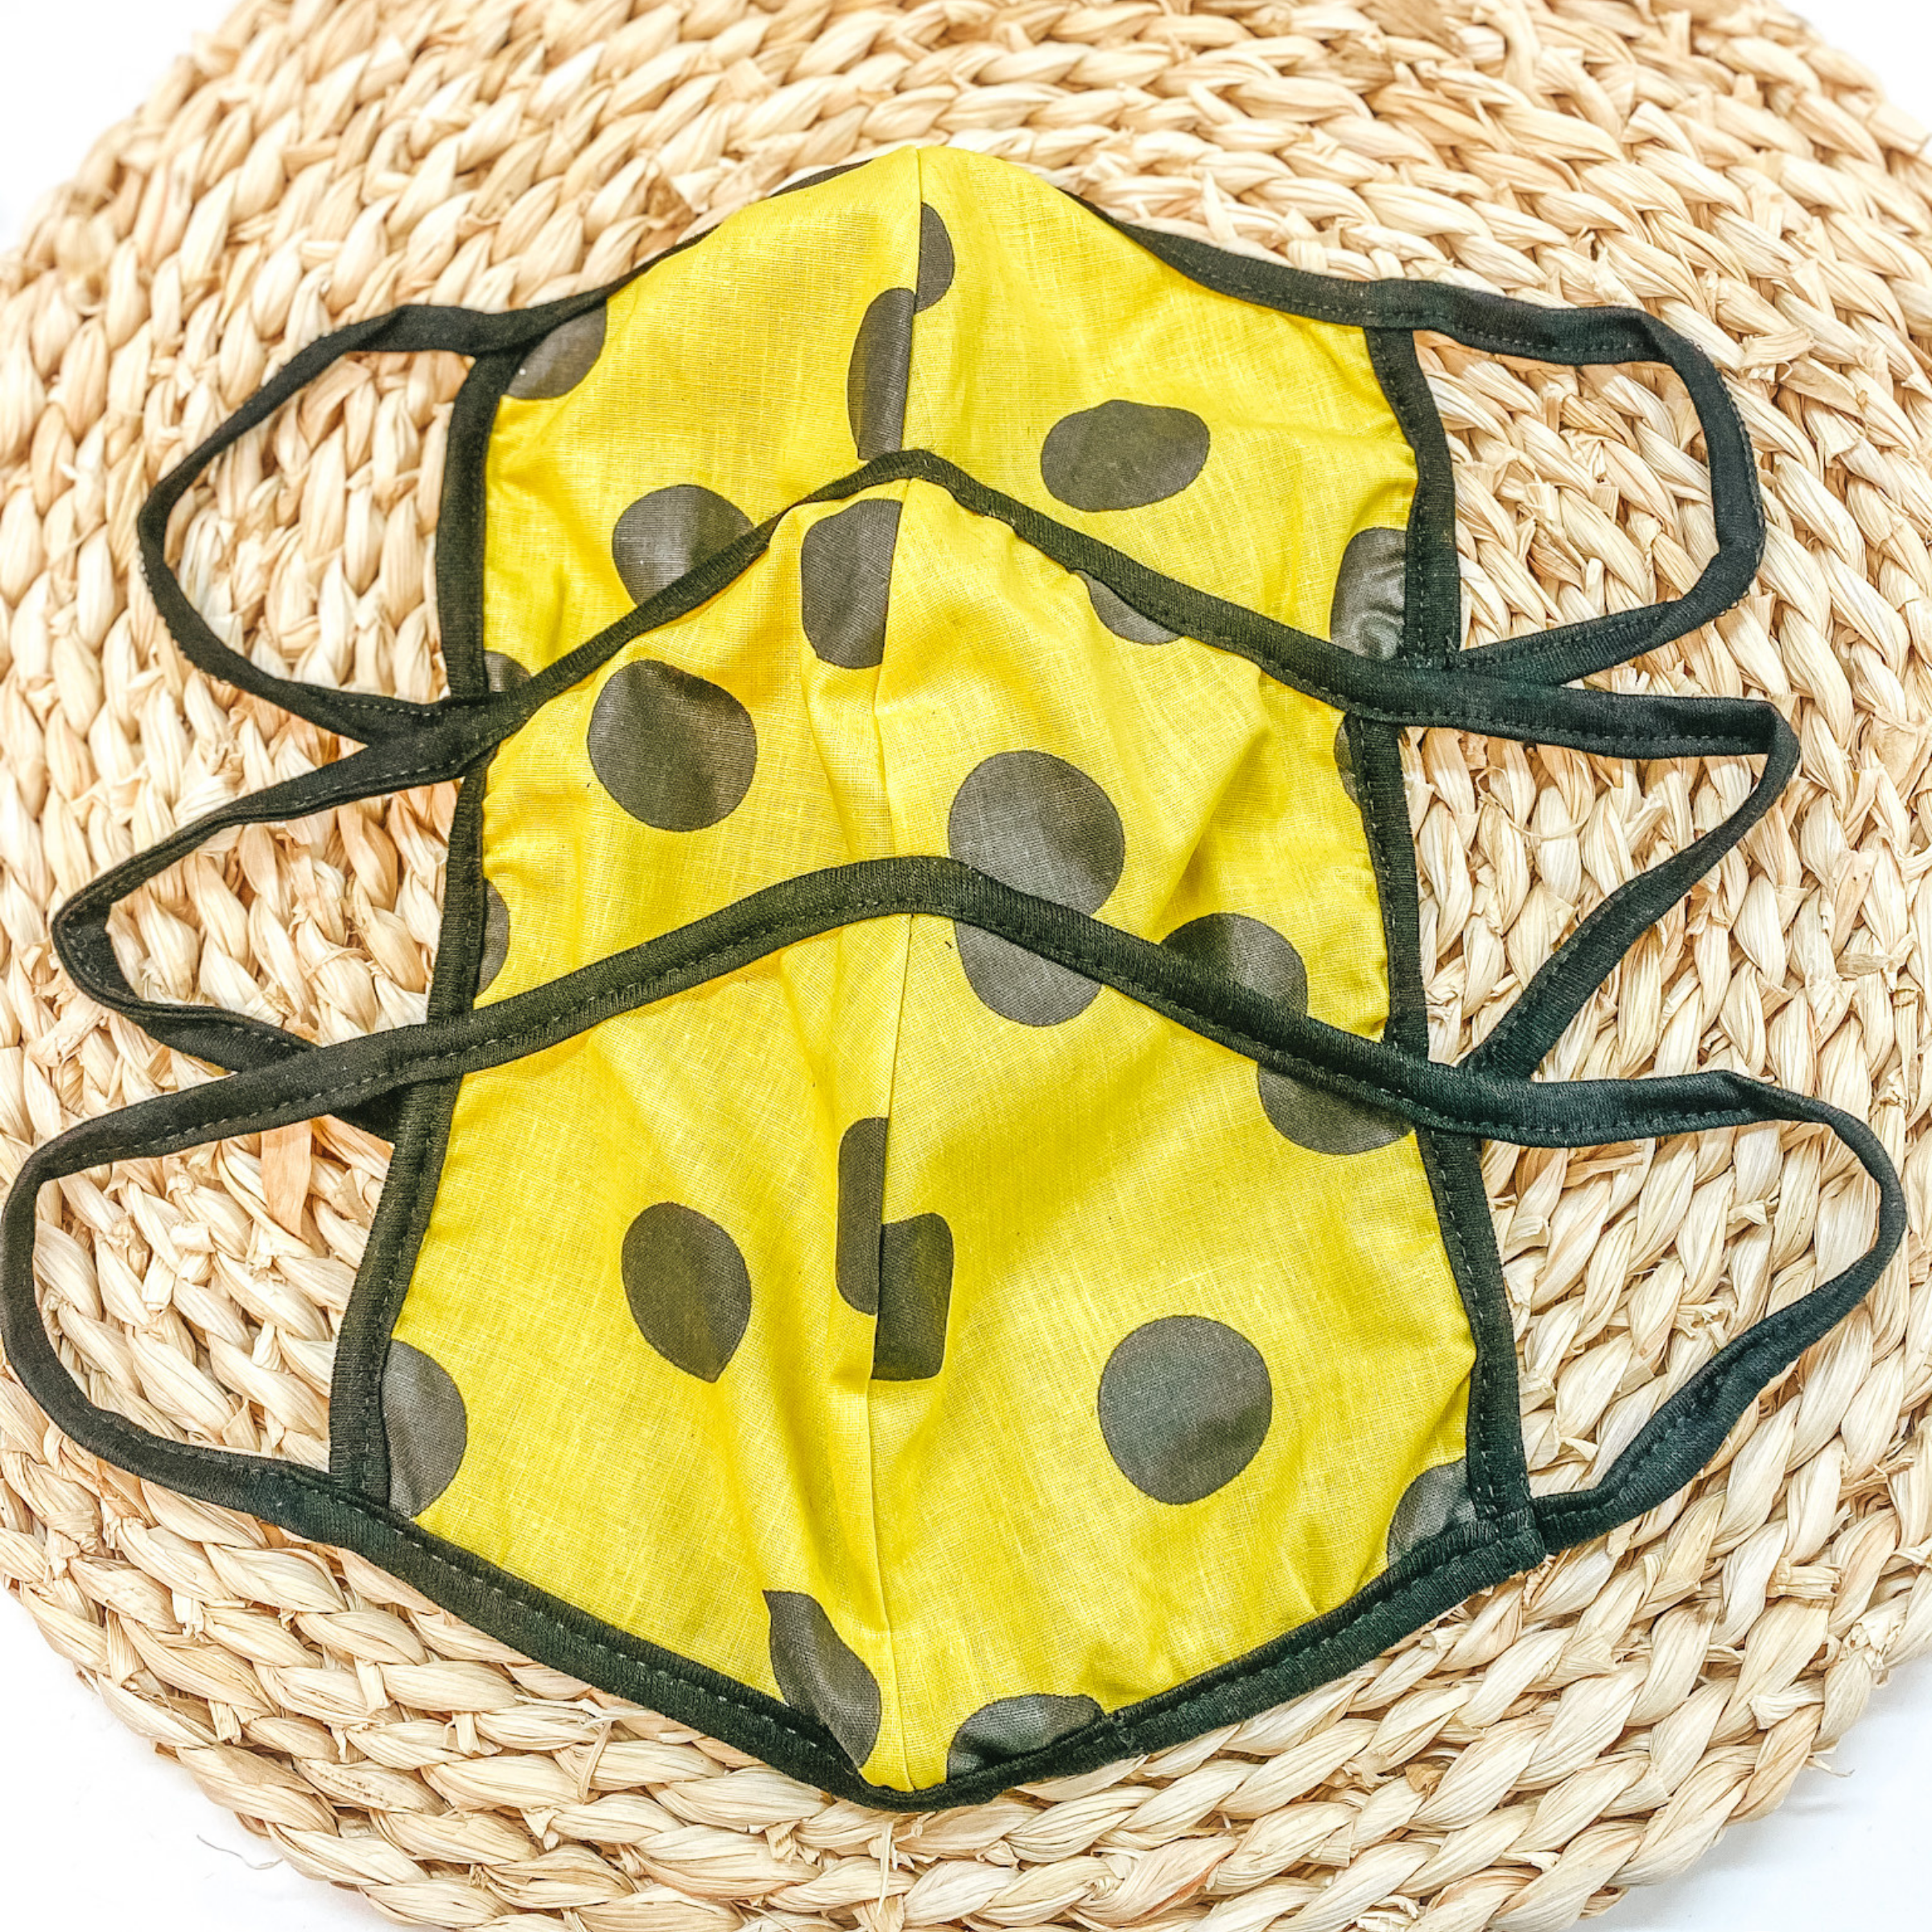 Can't Cover Style Face Covering in Yellow With Black Polka Dots - Giddy Up Glamour Boutique